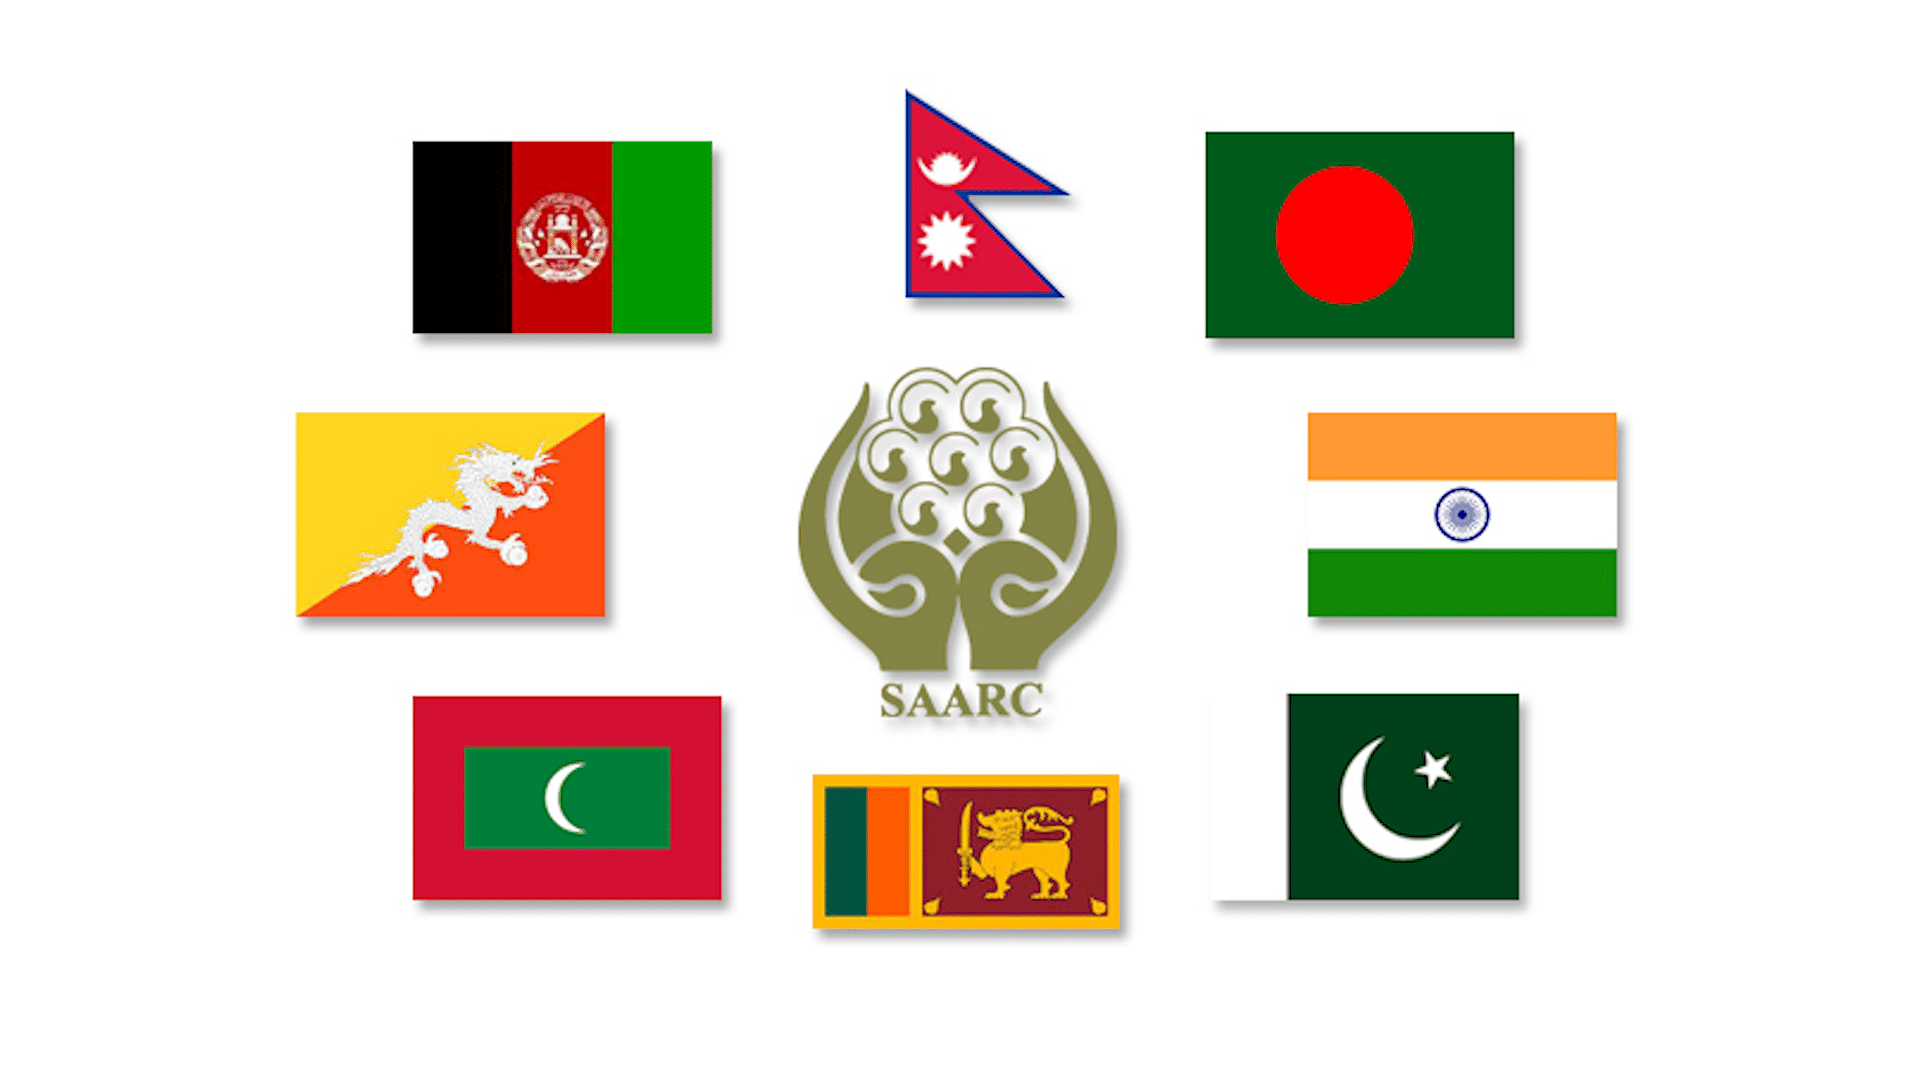 Pakistan boycotted a video conference of trade officials from the SAARC countries on 8 April.